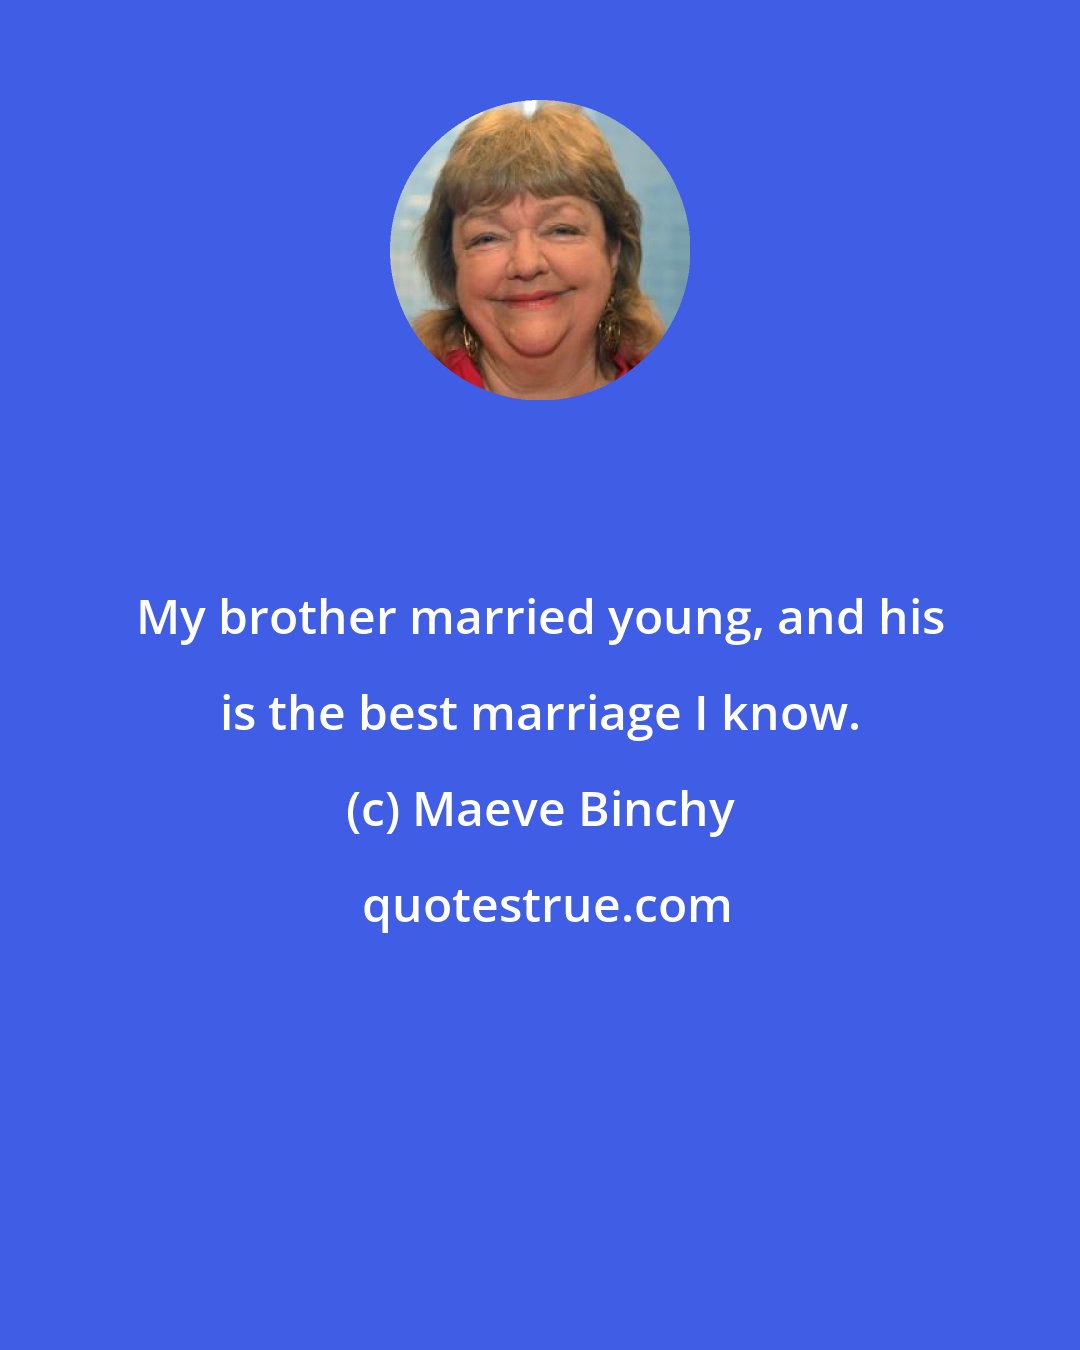 Maeve Binchy: My brother married young, and his is the best marriage I know.